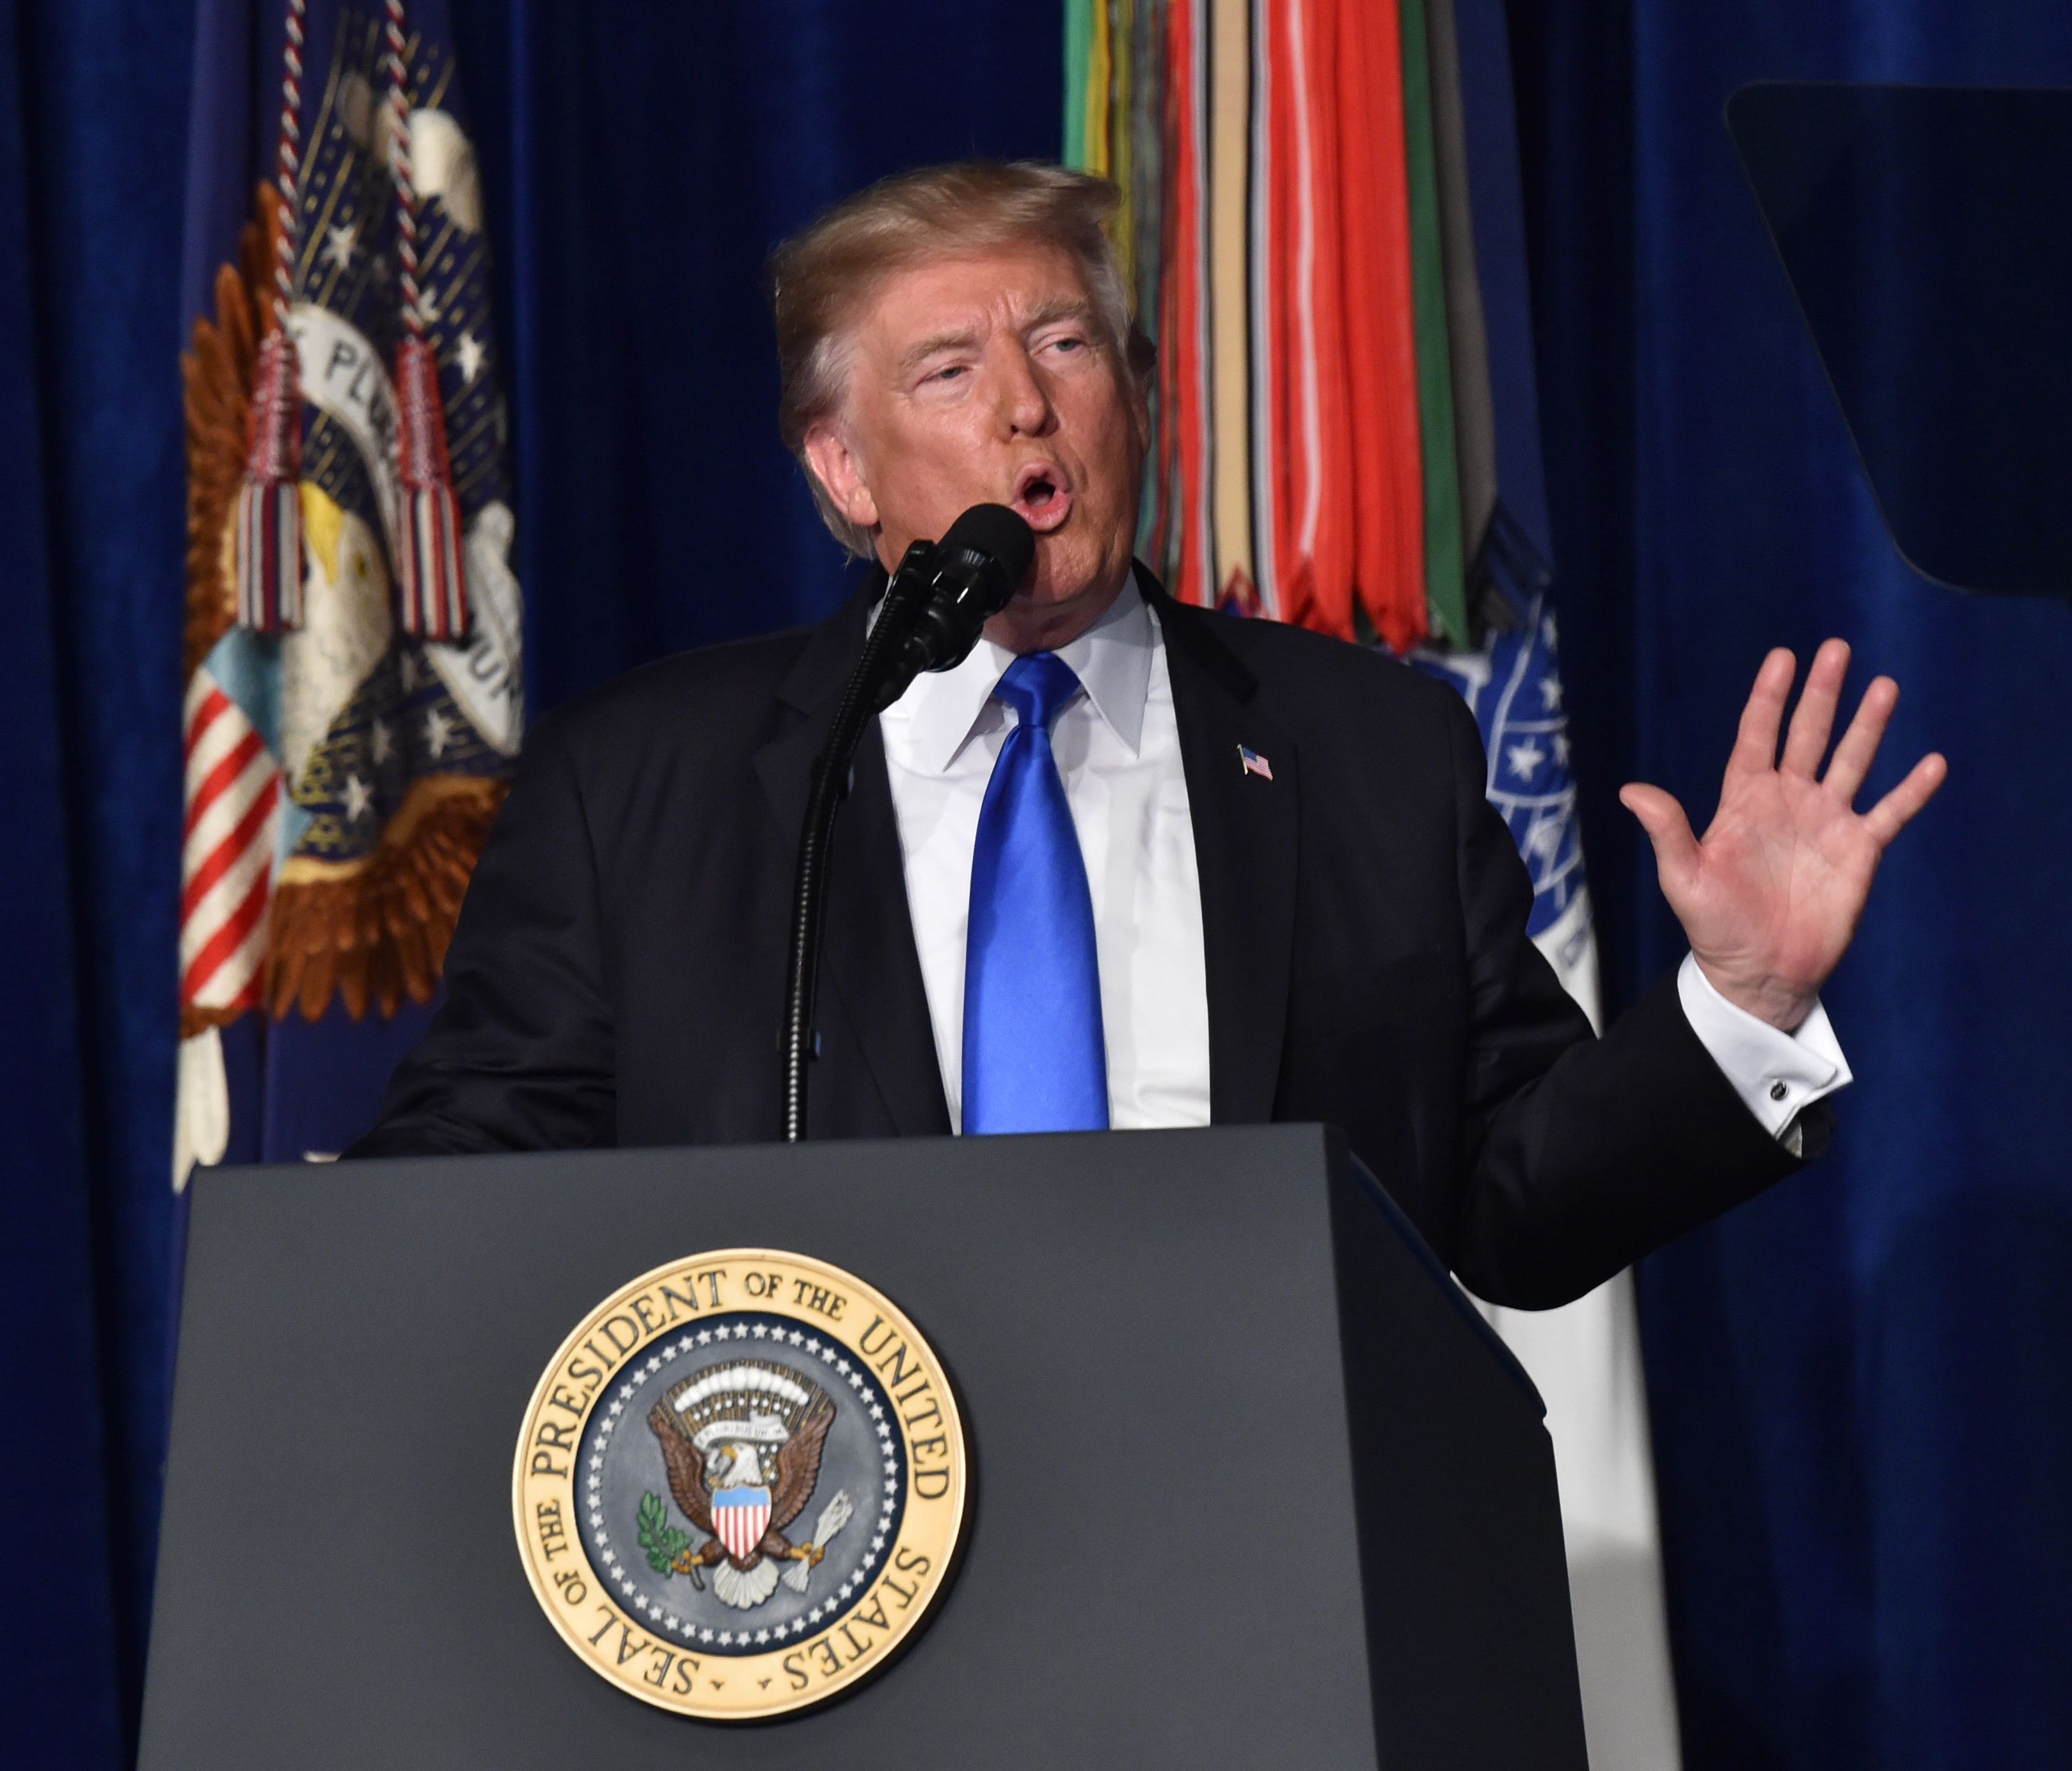 President Trump is pictured speaking during his address to the nation over the new U.S. military strategy in Afghanistan.